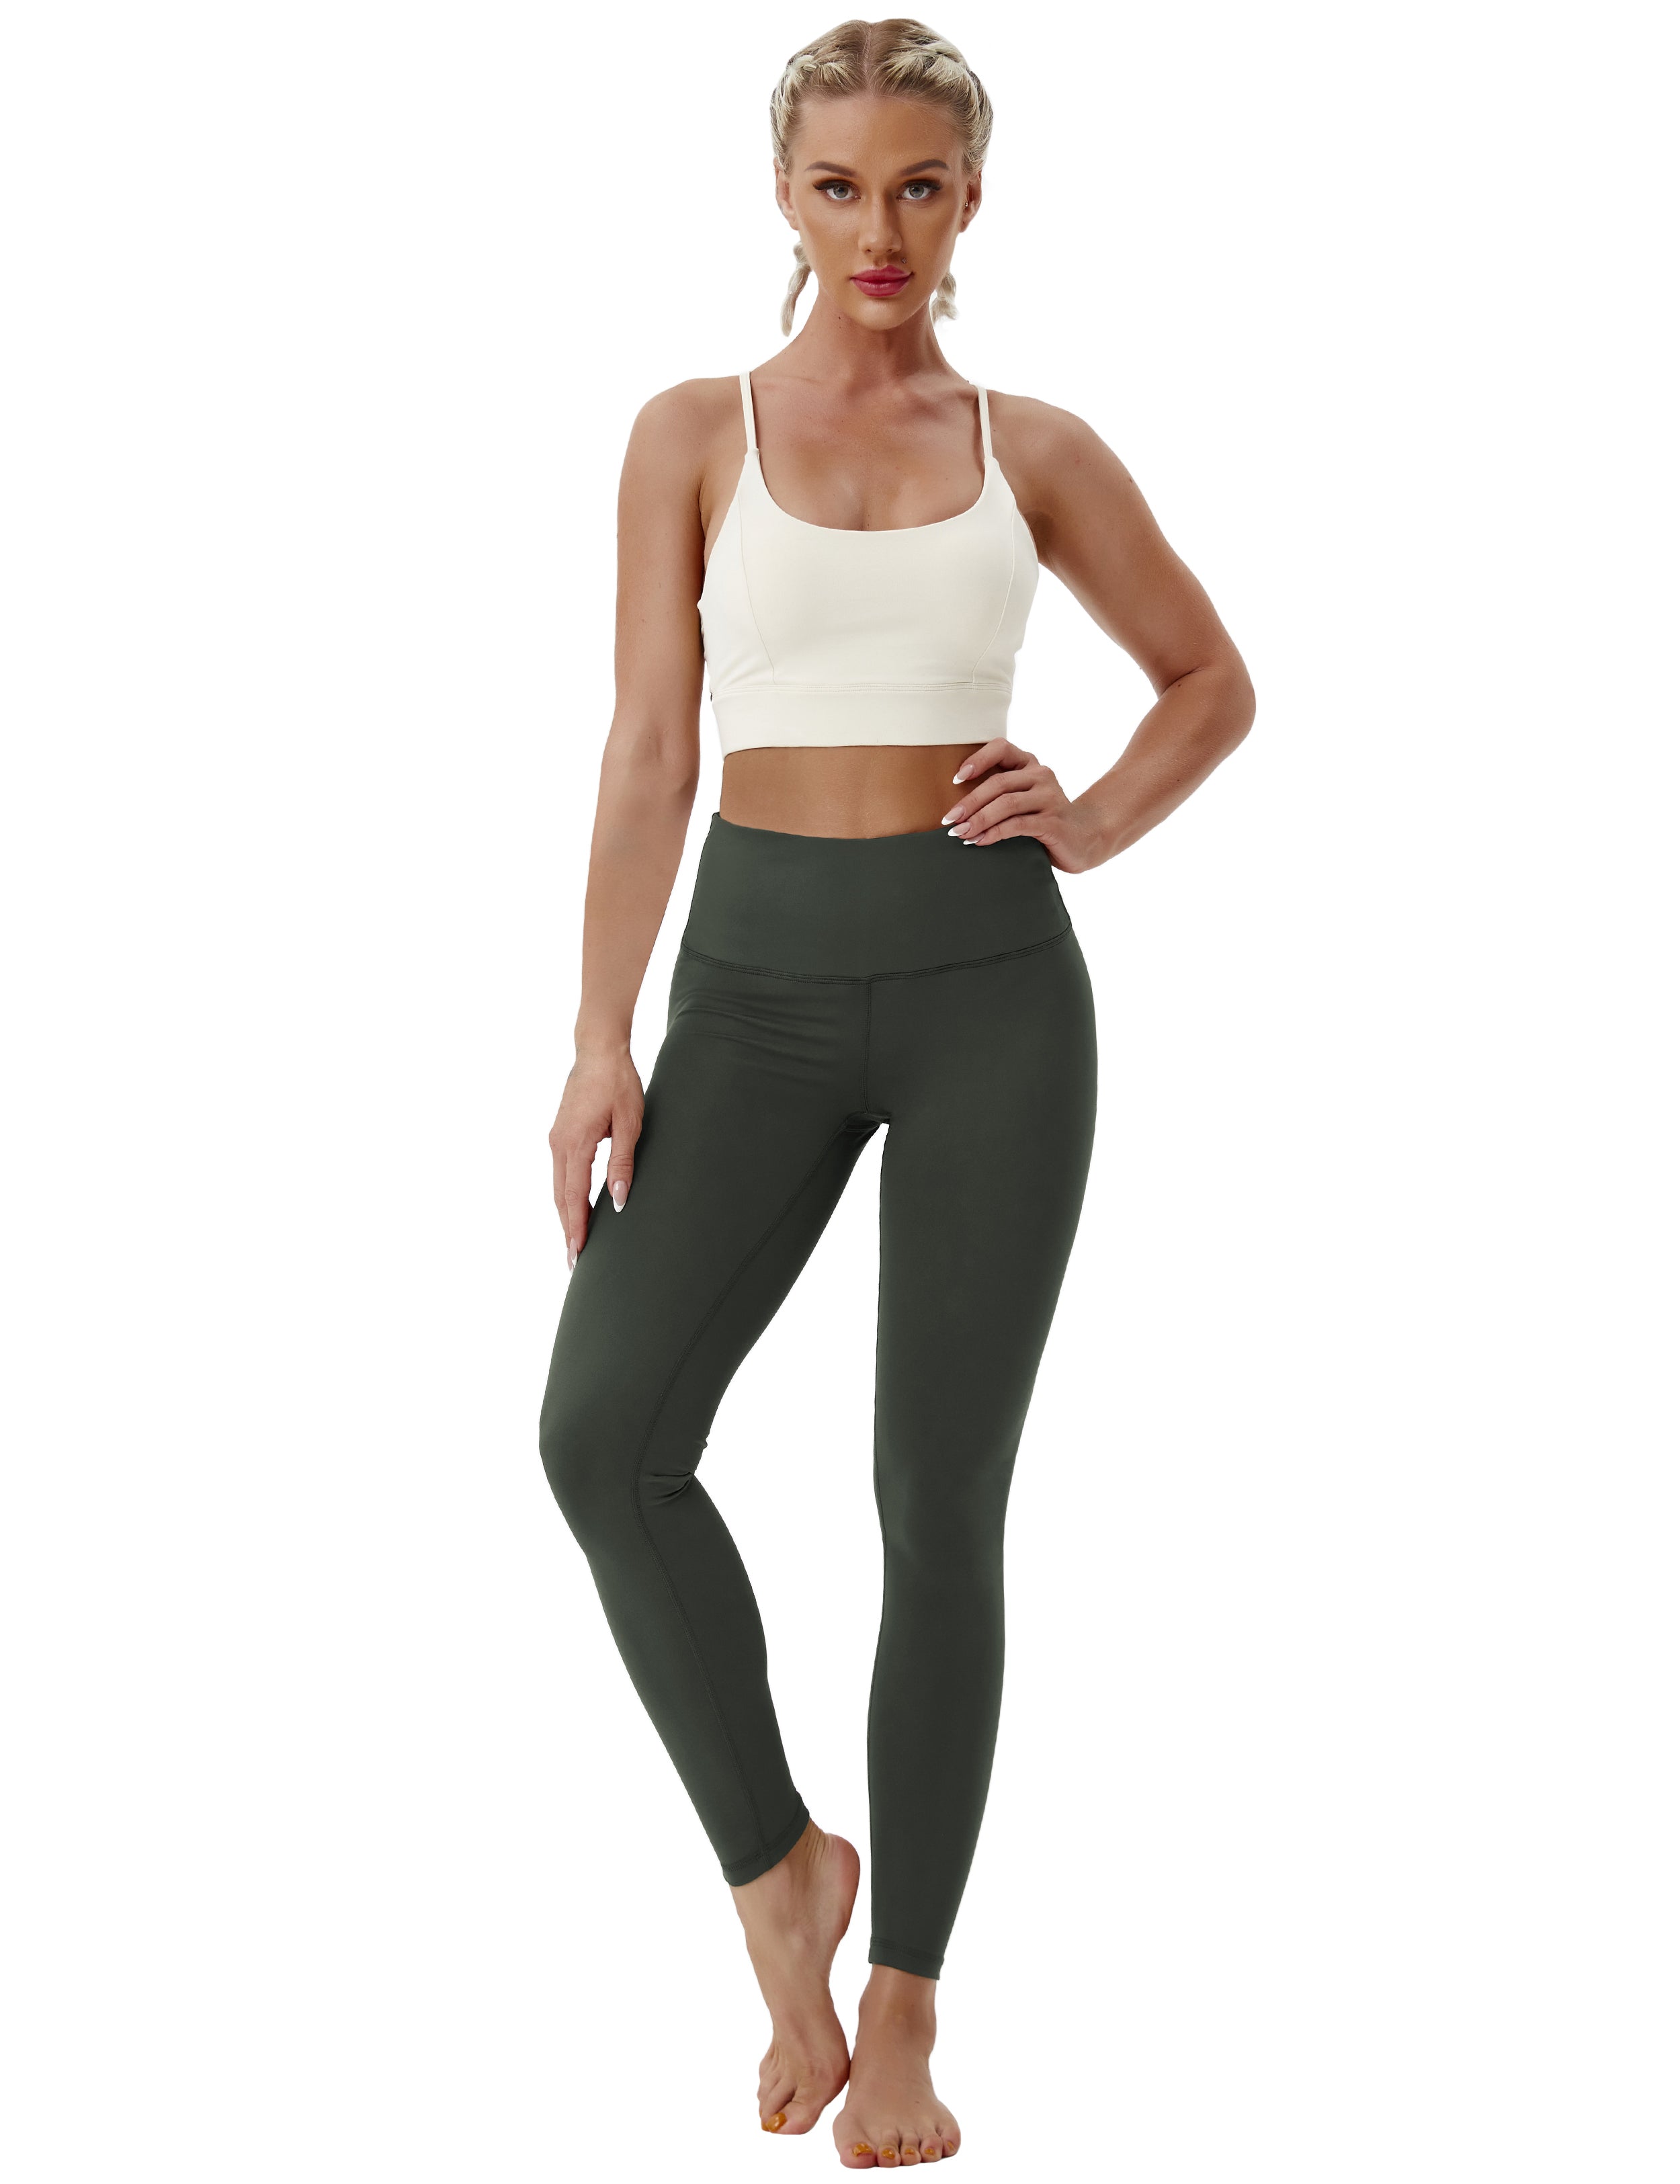 High Waist Running Pants olivegray 75%Nylon/25%Spandex Fabric doesn't attract lint easily 4-way stretch No see-through Moisture-wicking Tummy control Inner pocket Four lengths